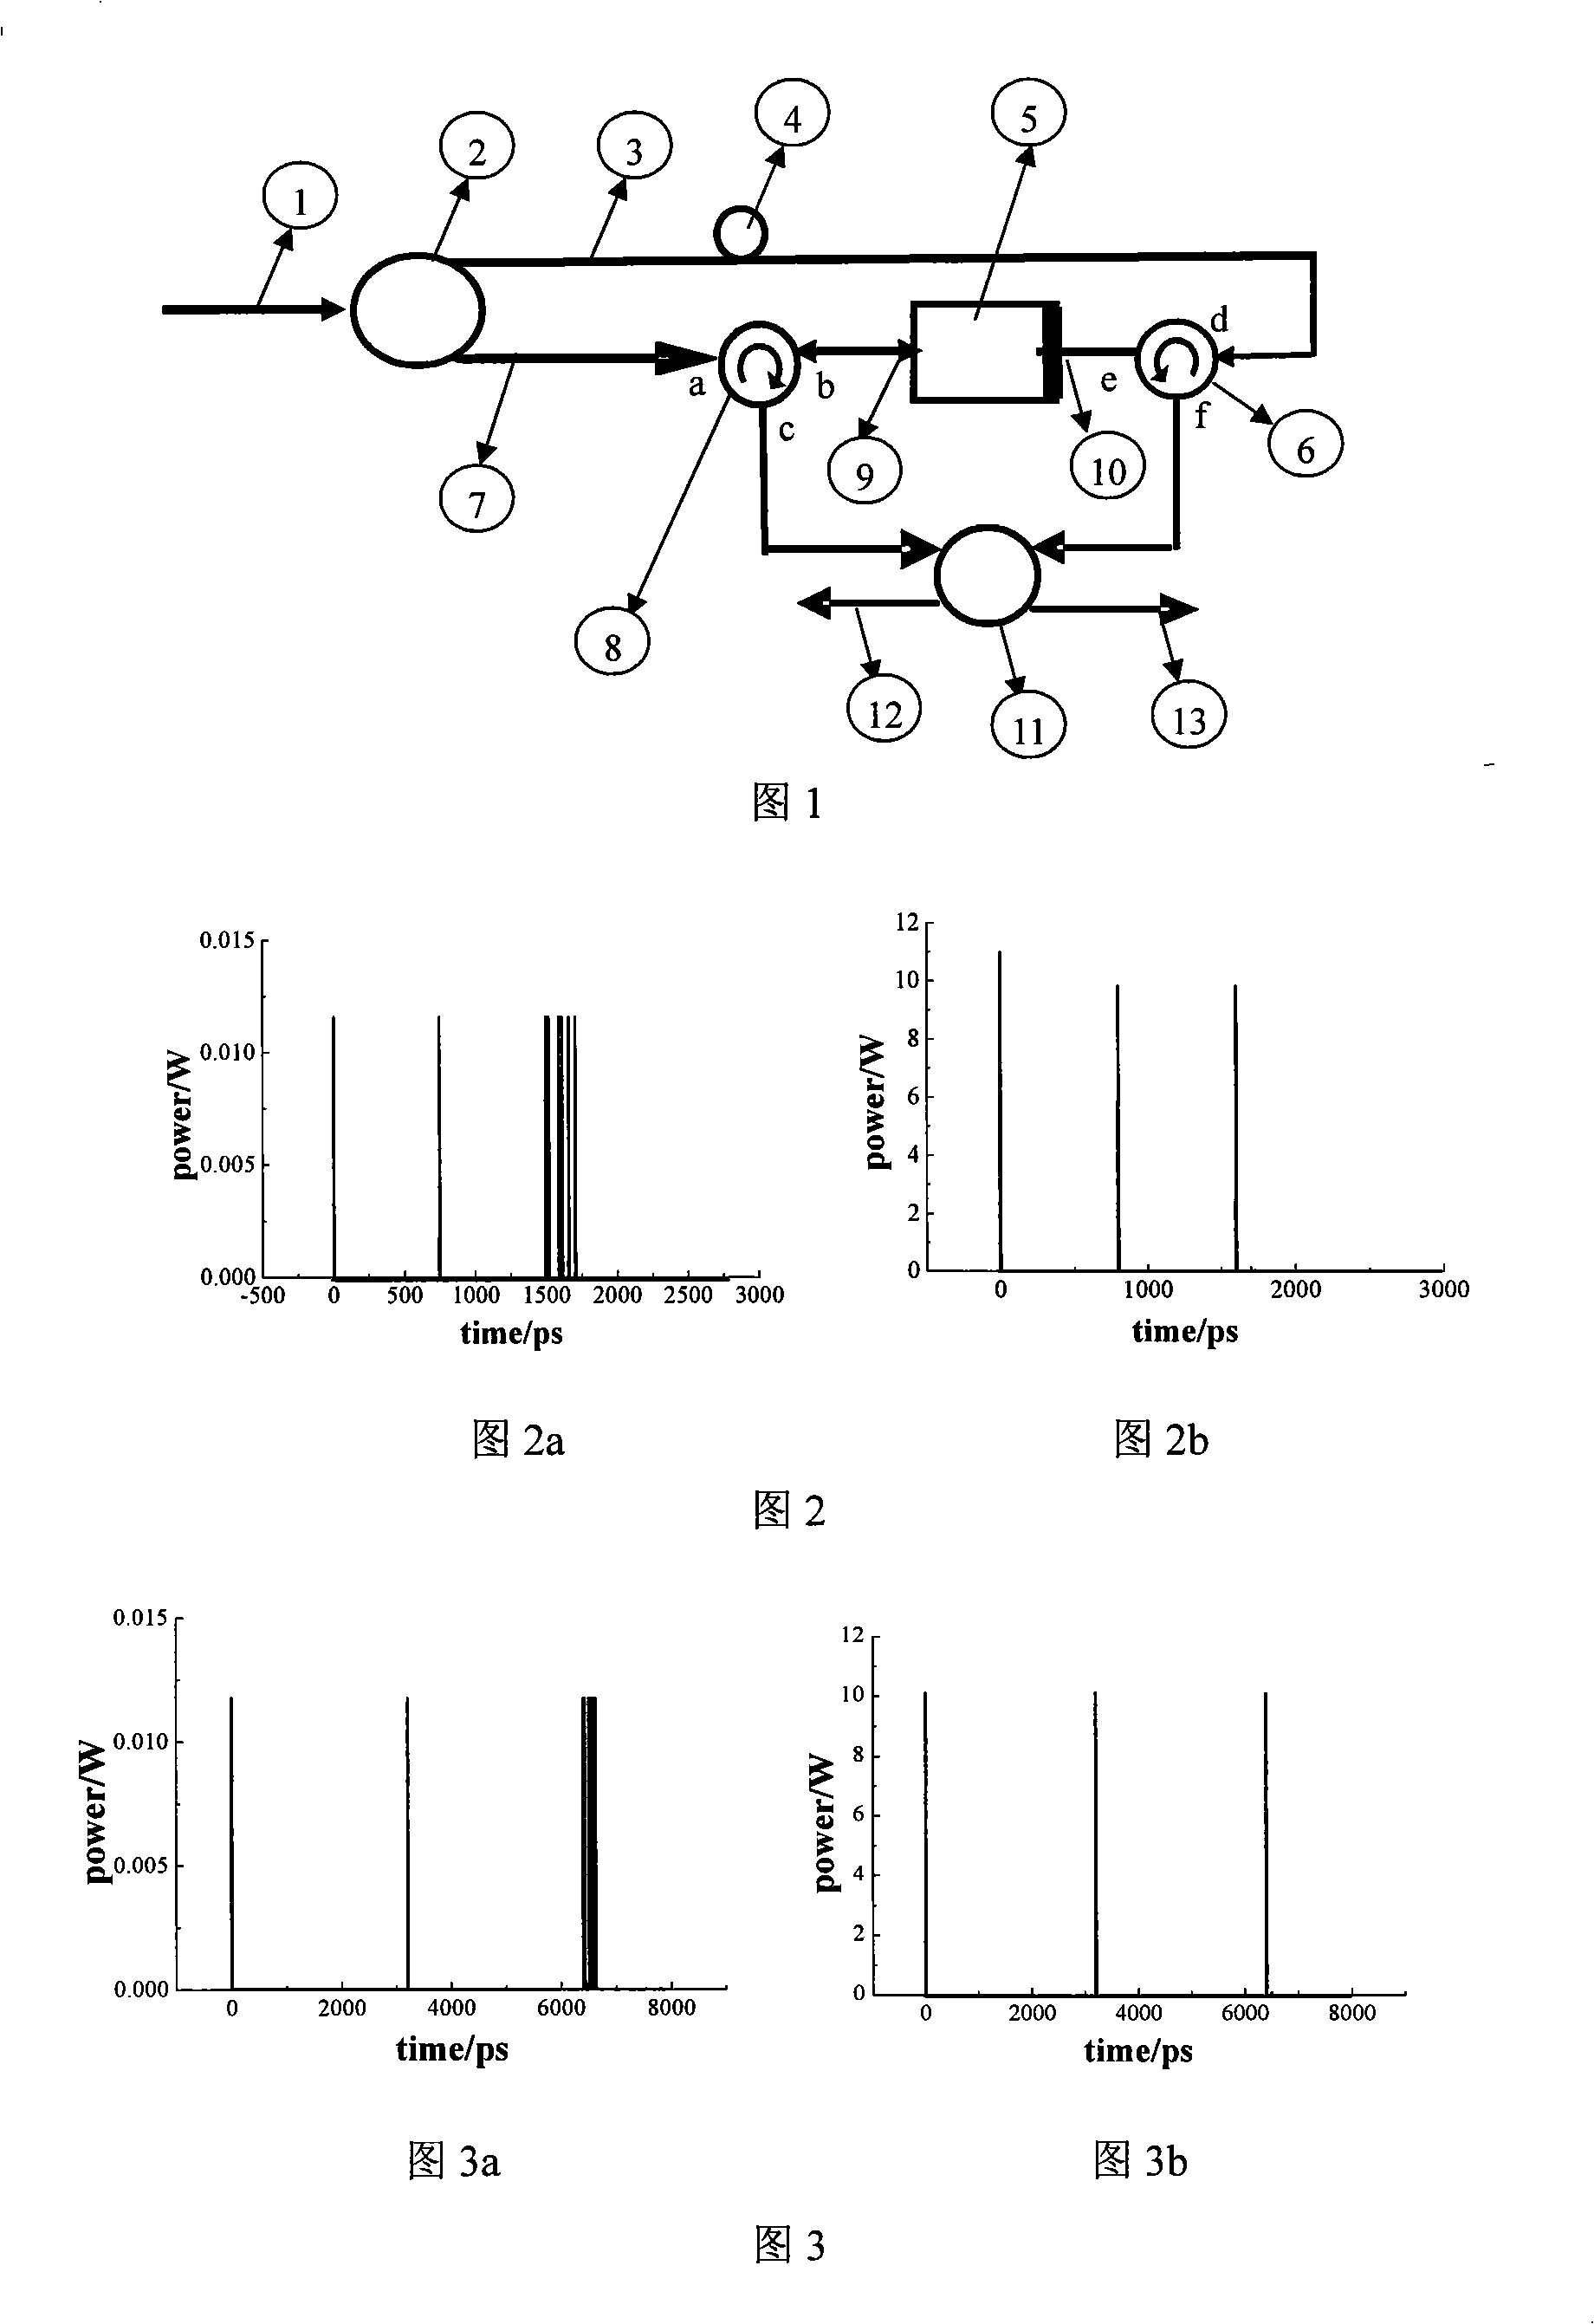 Optical packet head extracting structure used for asynchronous optical packet switching network